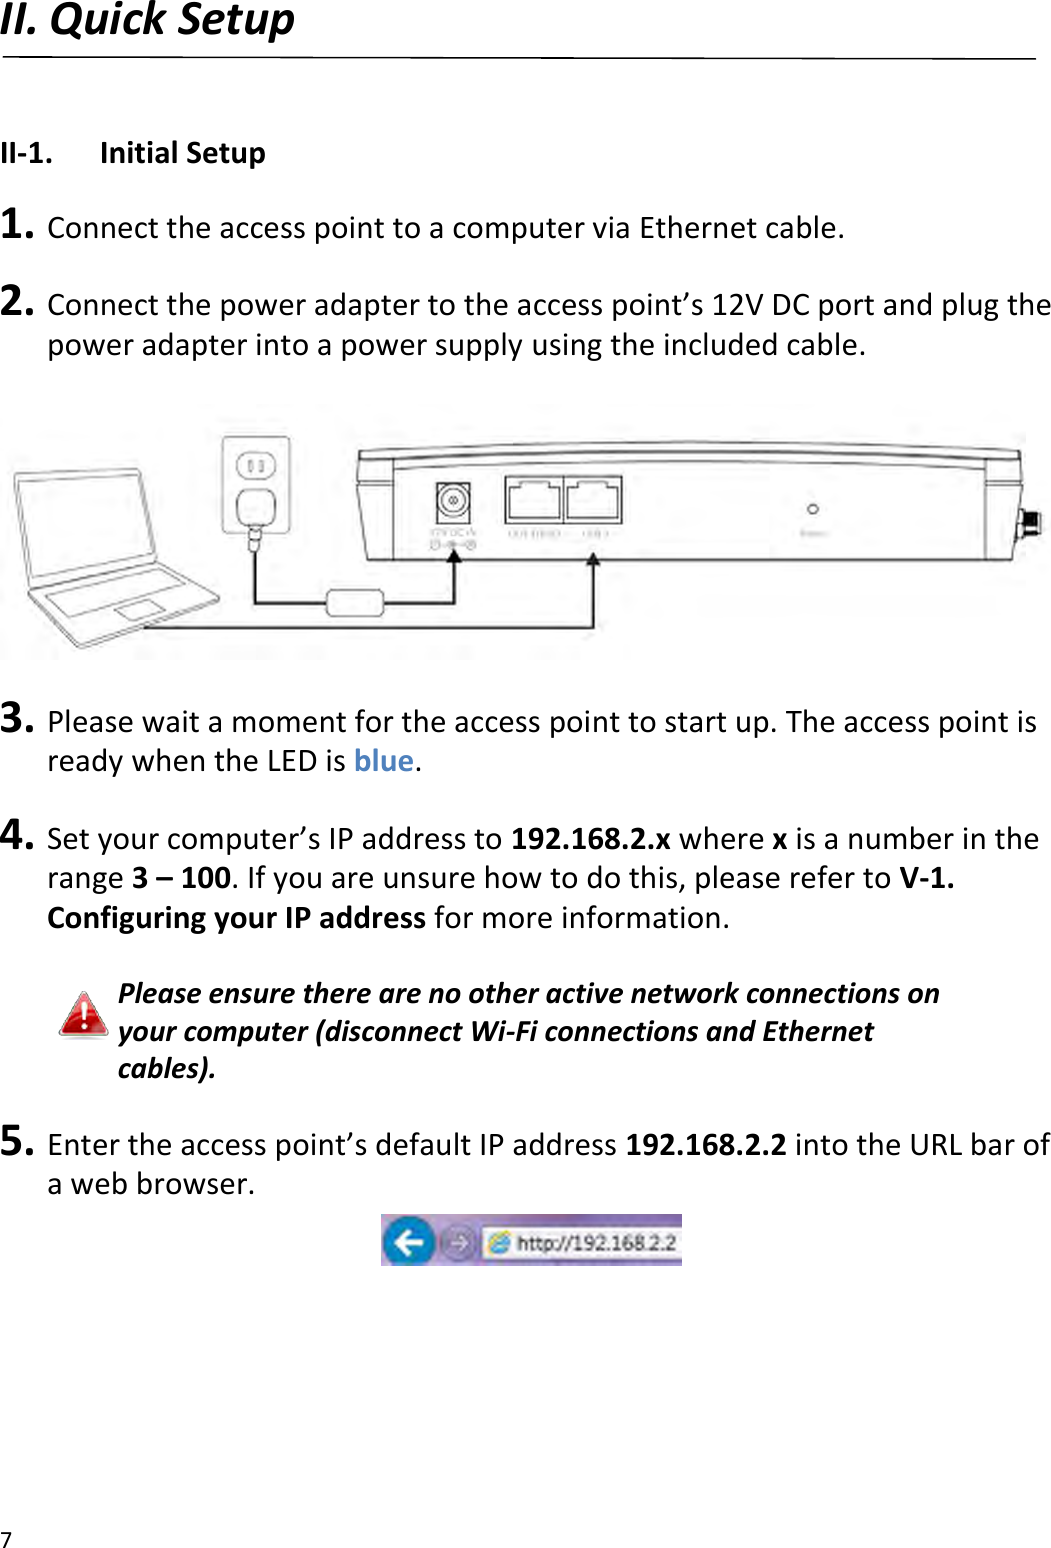 7  II. Quick Setup  II-1.  Initial Setup  1. Connect the access point to a computer via Ethernet cable.  2. Connect the power adapter to the access point’s 12V DC port and plug the power adapter into a power supply using the included cable.    3. Please wait a moment for the access point to start up. The access point is ready when the LED is blue.  4. Set your computer’s IP address to 192.168.2.x where x is a number in the range 3 – 100. If you are unsure how to do this, please refer to V-1. Configuring your IP address for more information.  Please ensure there are no other active network connections on your computer (disconnect Wi-Fi connections and Ethernet cables).  5. Enter the access point’s default IP address 192.168.2.2 into the URL bar of a web browser.       